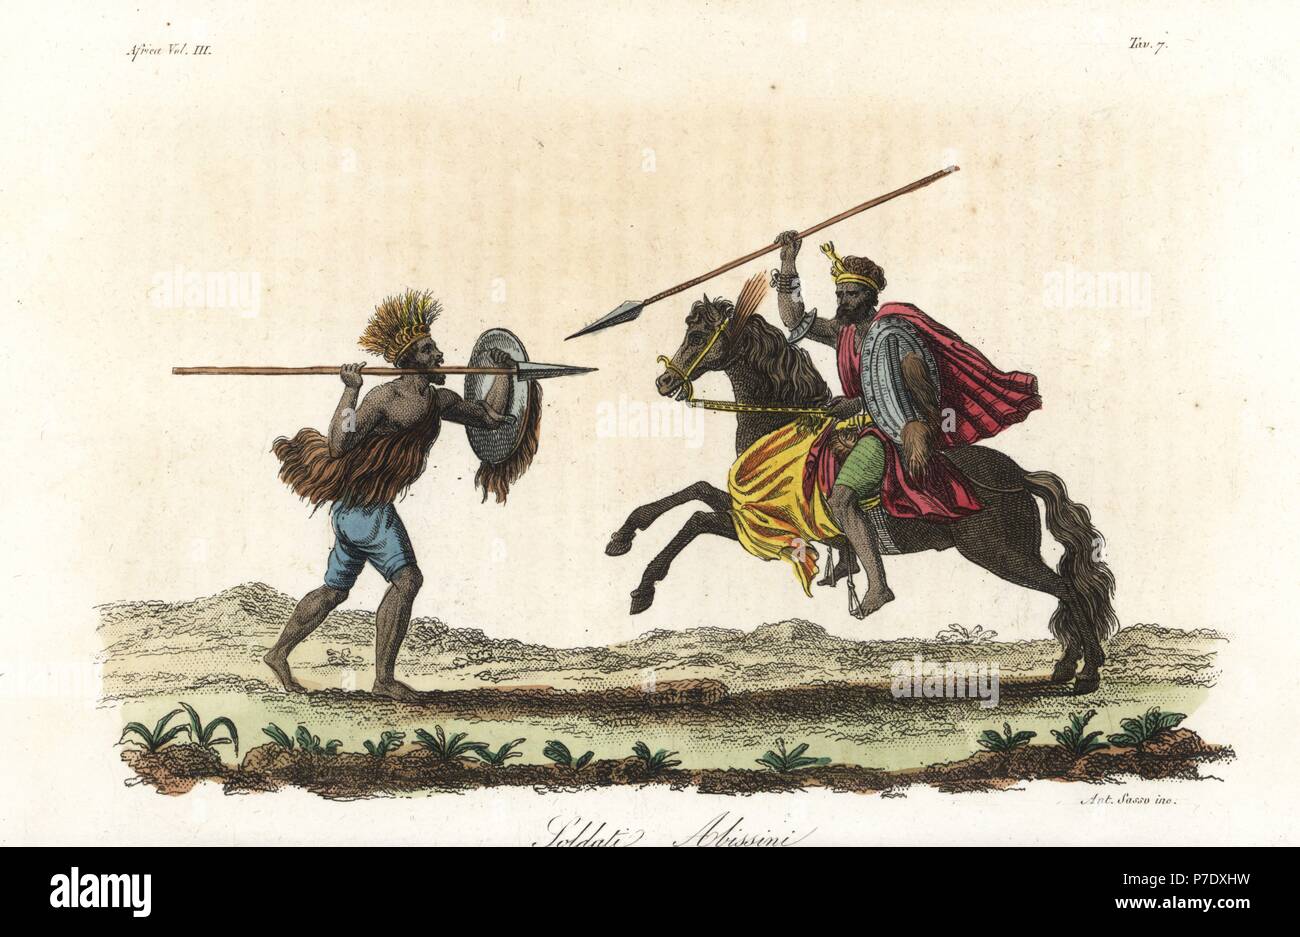 Abyssinian infantry with spear and shield, and Abyssinian cavalry with lance. In victory they were known to cut off the manhood of their vanquished enemies. Handcoloured copperplate engraving by Antonio Sasso from Giulio Ferrario's Ancient and Modern Costumes of all the Peoples of the World, Florence, Italy, 1843. Stock Photo